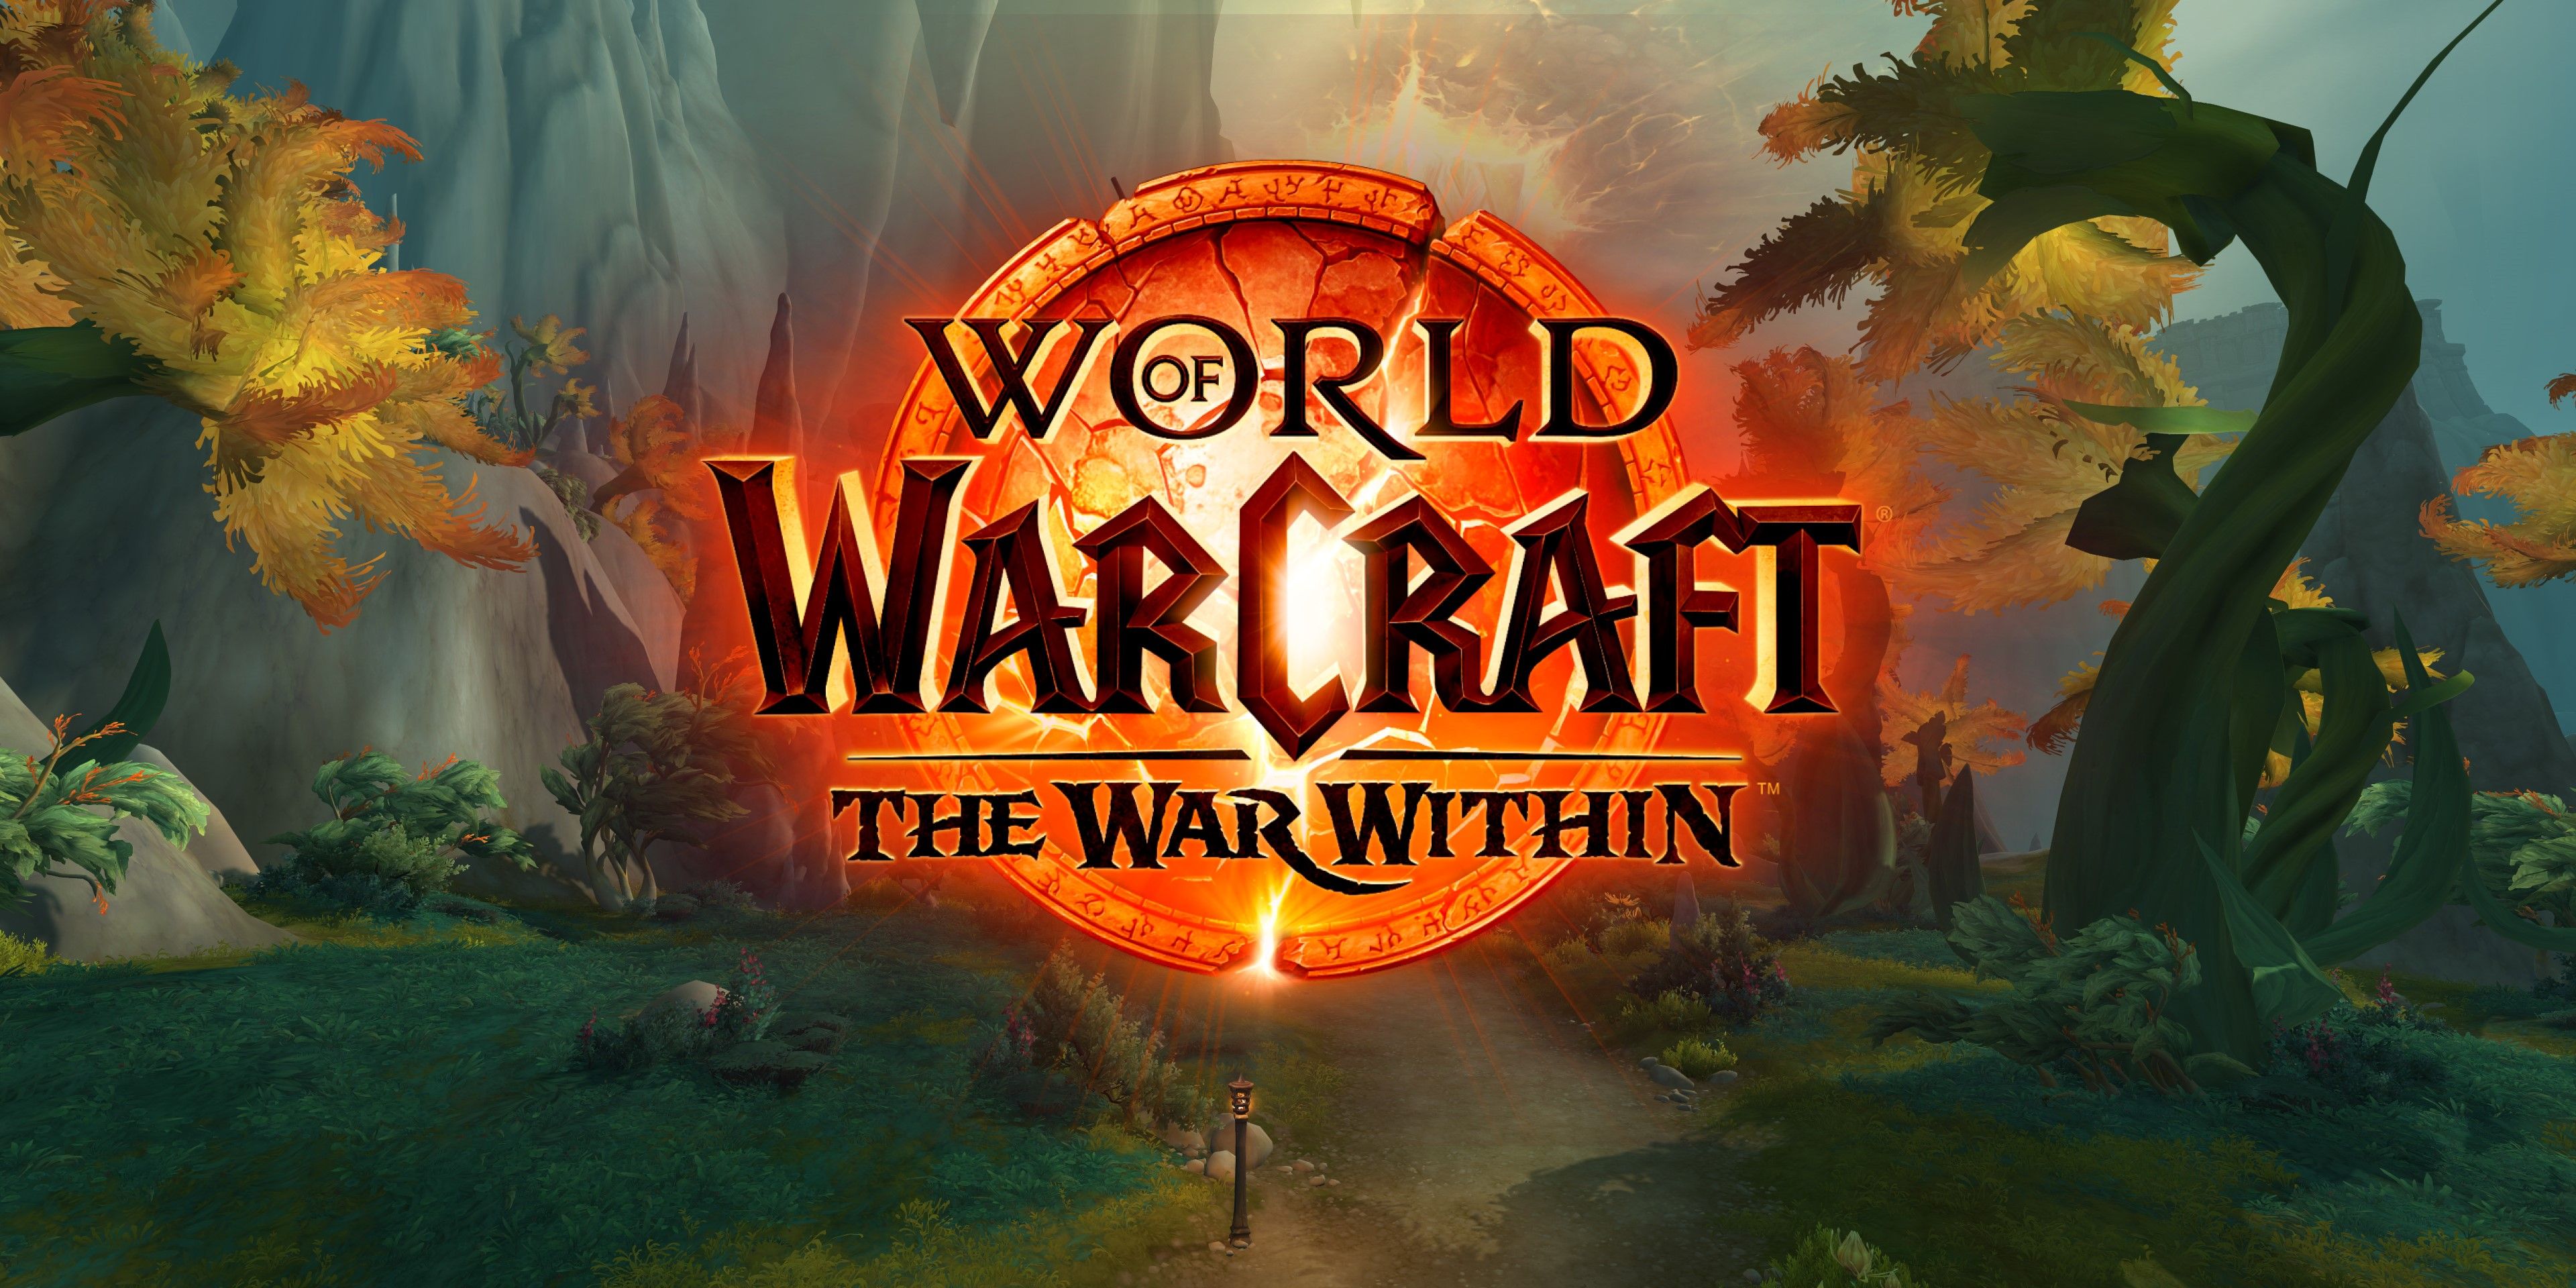 hallowfall region in wow tww with the logo in front of it